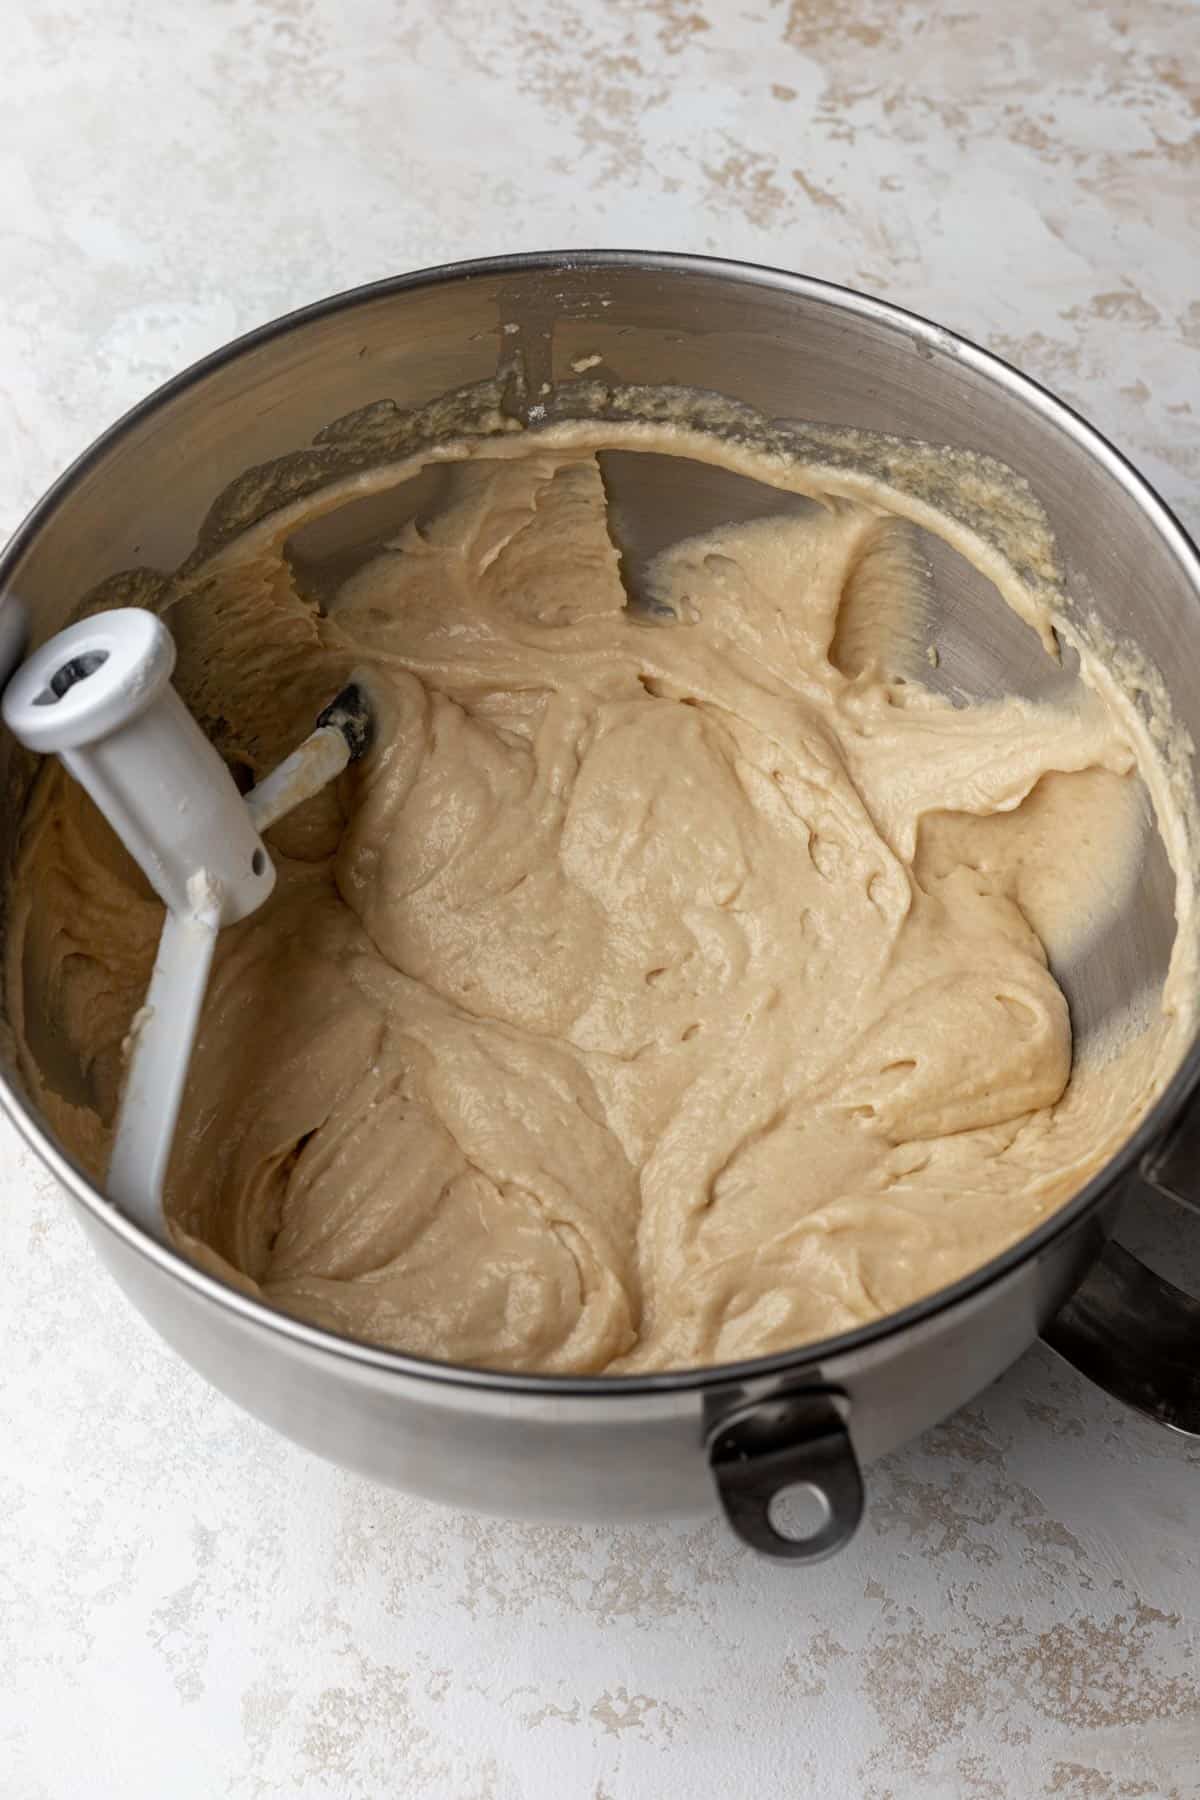 Raw cake batter in a mixing bowl.